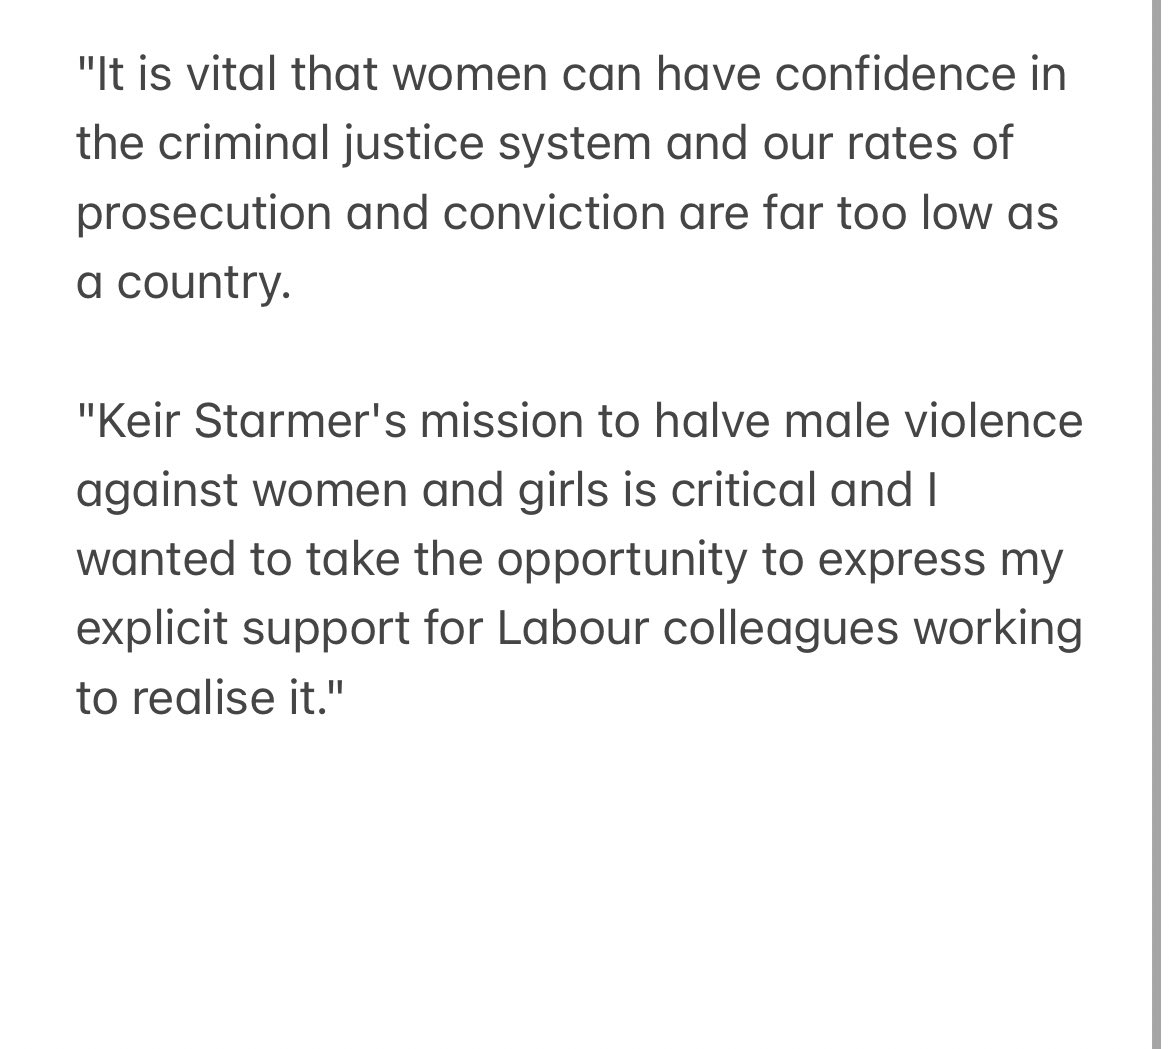 Natalie Elphicke has put out a statement apologising about the comments she made about her husband’s victims. Am told this is what she said privately to Starmer when asked about it, but the backlash on Labour benches has clearly led to leadership wanting to make this public